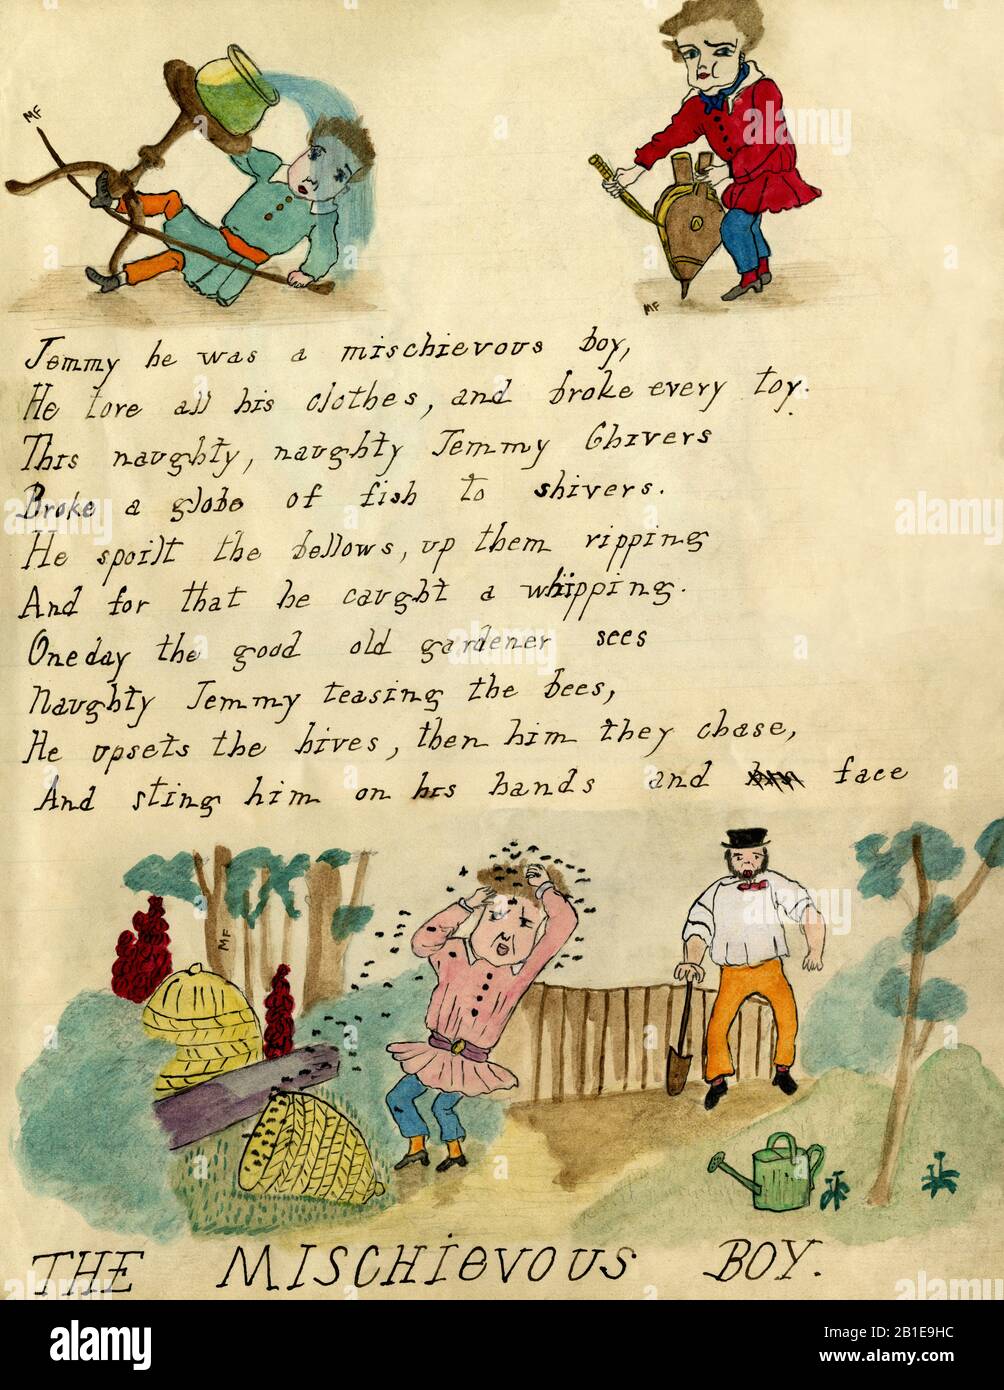 Mischievous Boy cautionary tale in painting and verse, created in England in the late 1800s by a Victorian child.  Part of a manuscript volume compiled circa 1880 for May Chatteris Fisher (1874-1910) by her cousins.  The verse on this page explains that the Mischievous Boy “tore all his clothes and broke every toy” and, amongst other mishaps and naughty pranks, teased bees, upset their hives and was chased and stung by the bees. Stock Photo